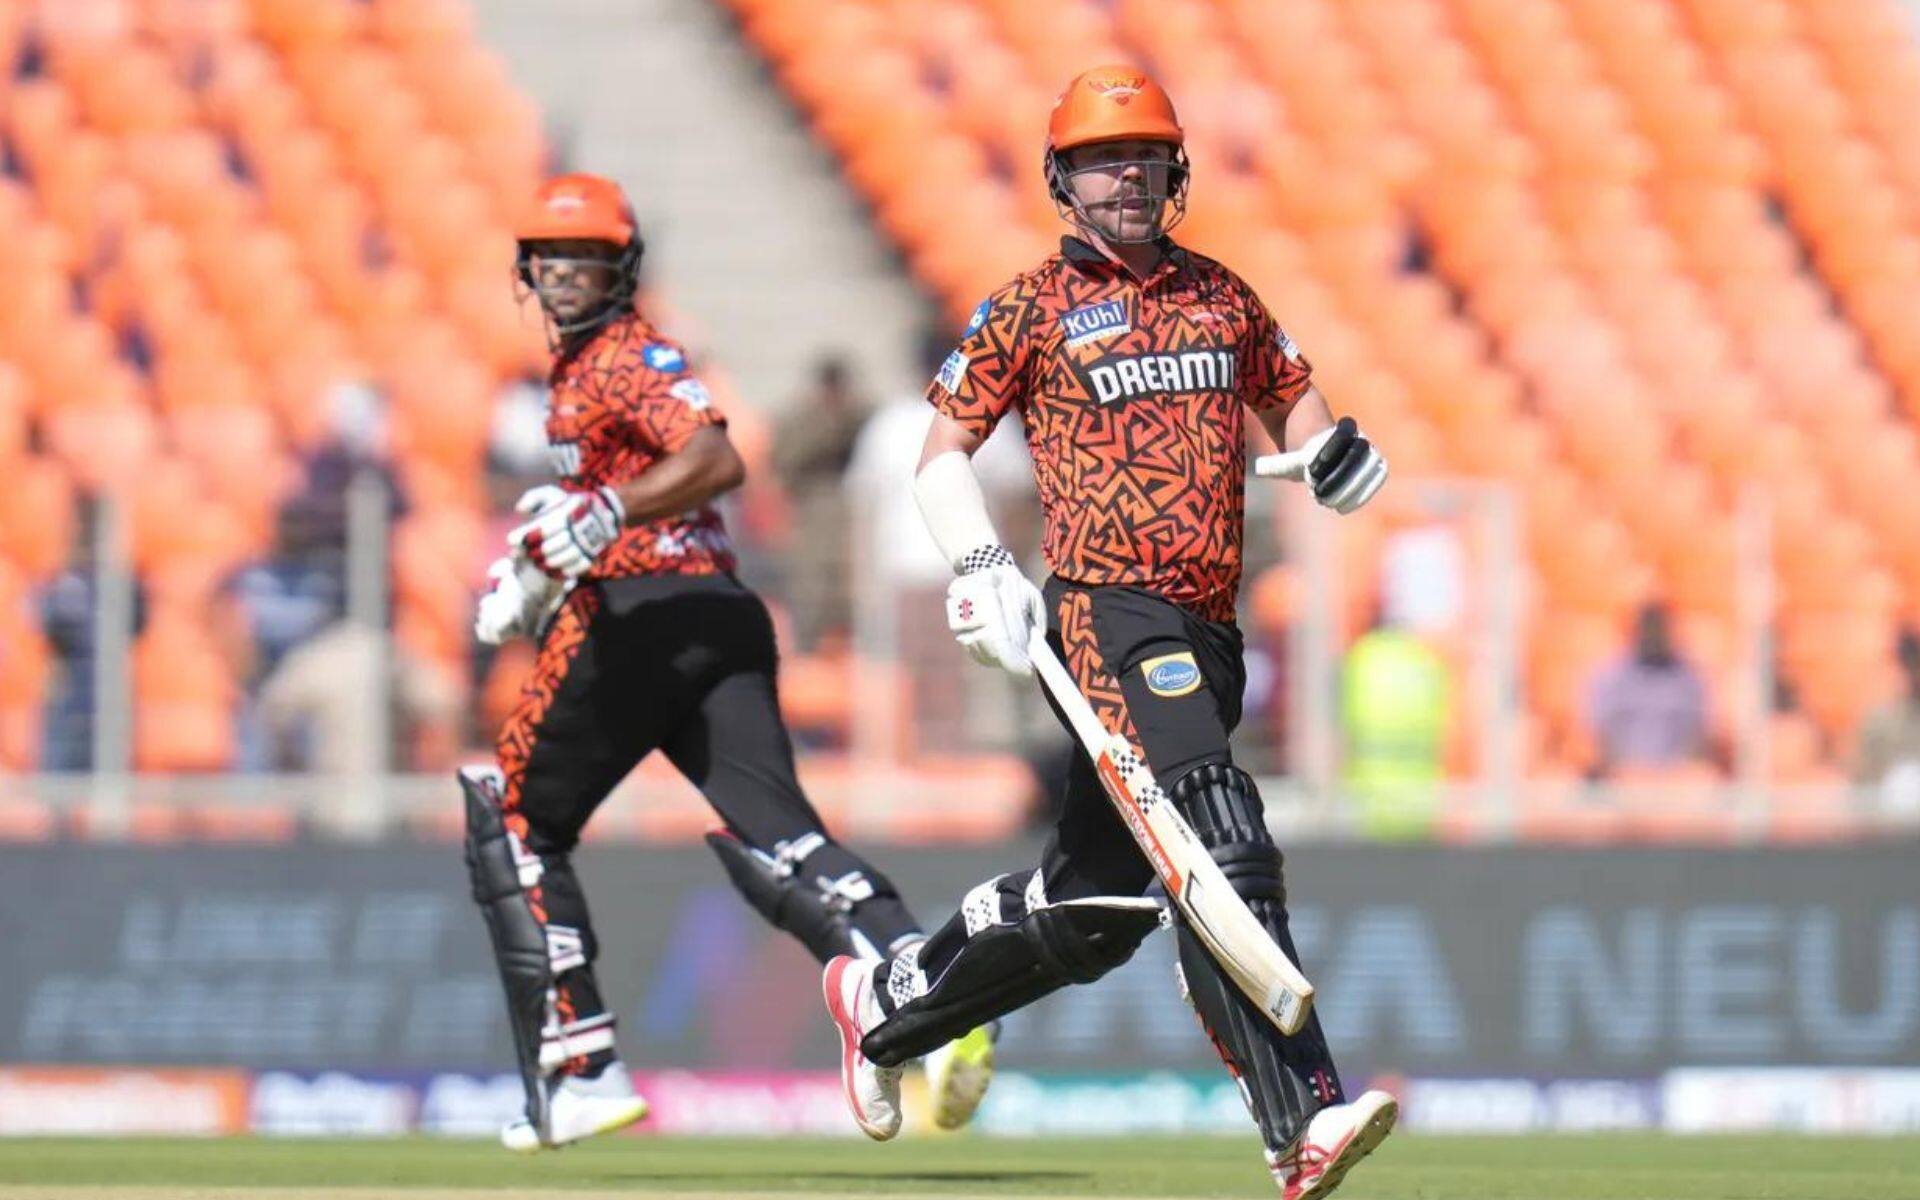 The SRH batting order failed to up the ante at the correct time [iplt20.com]